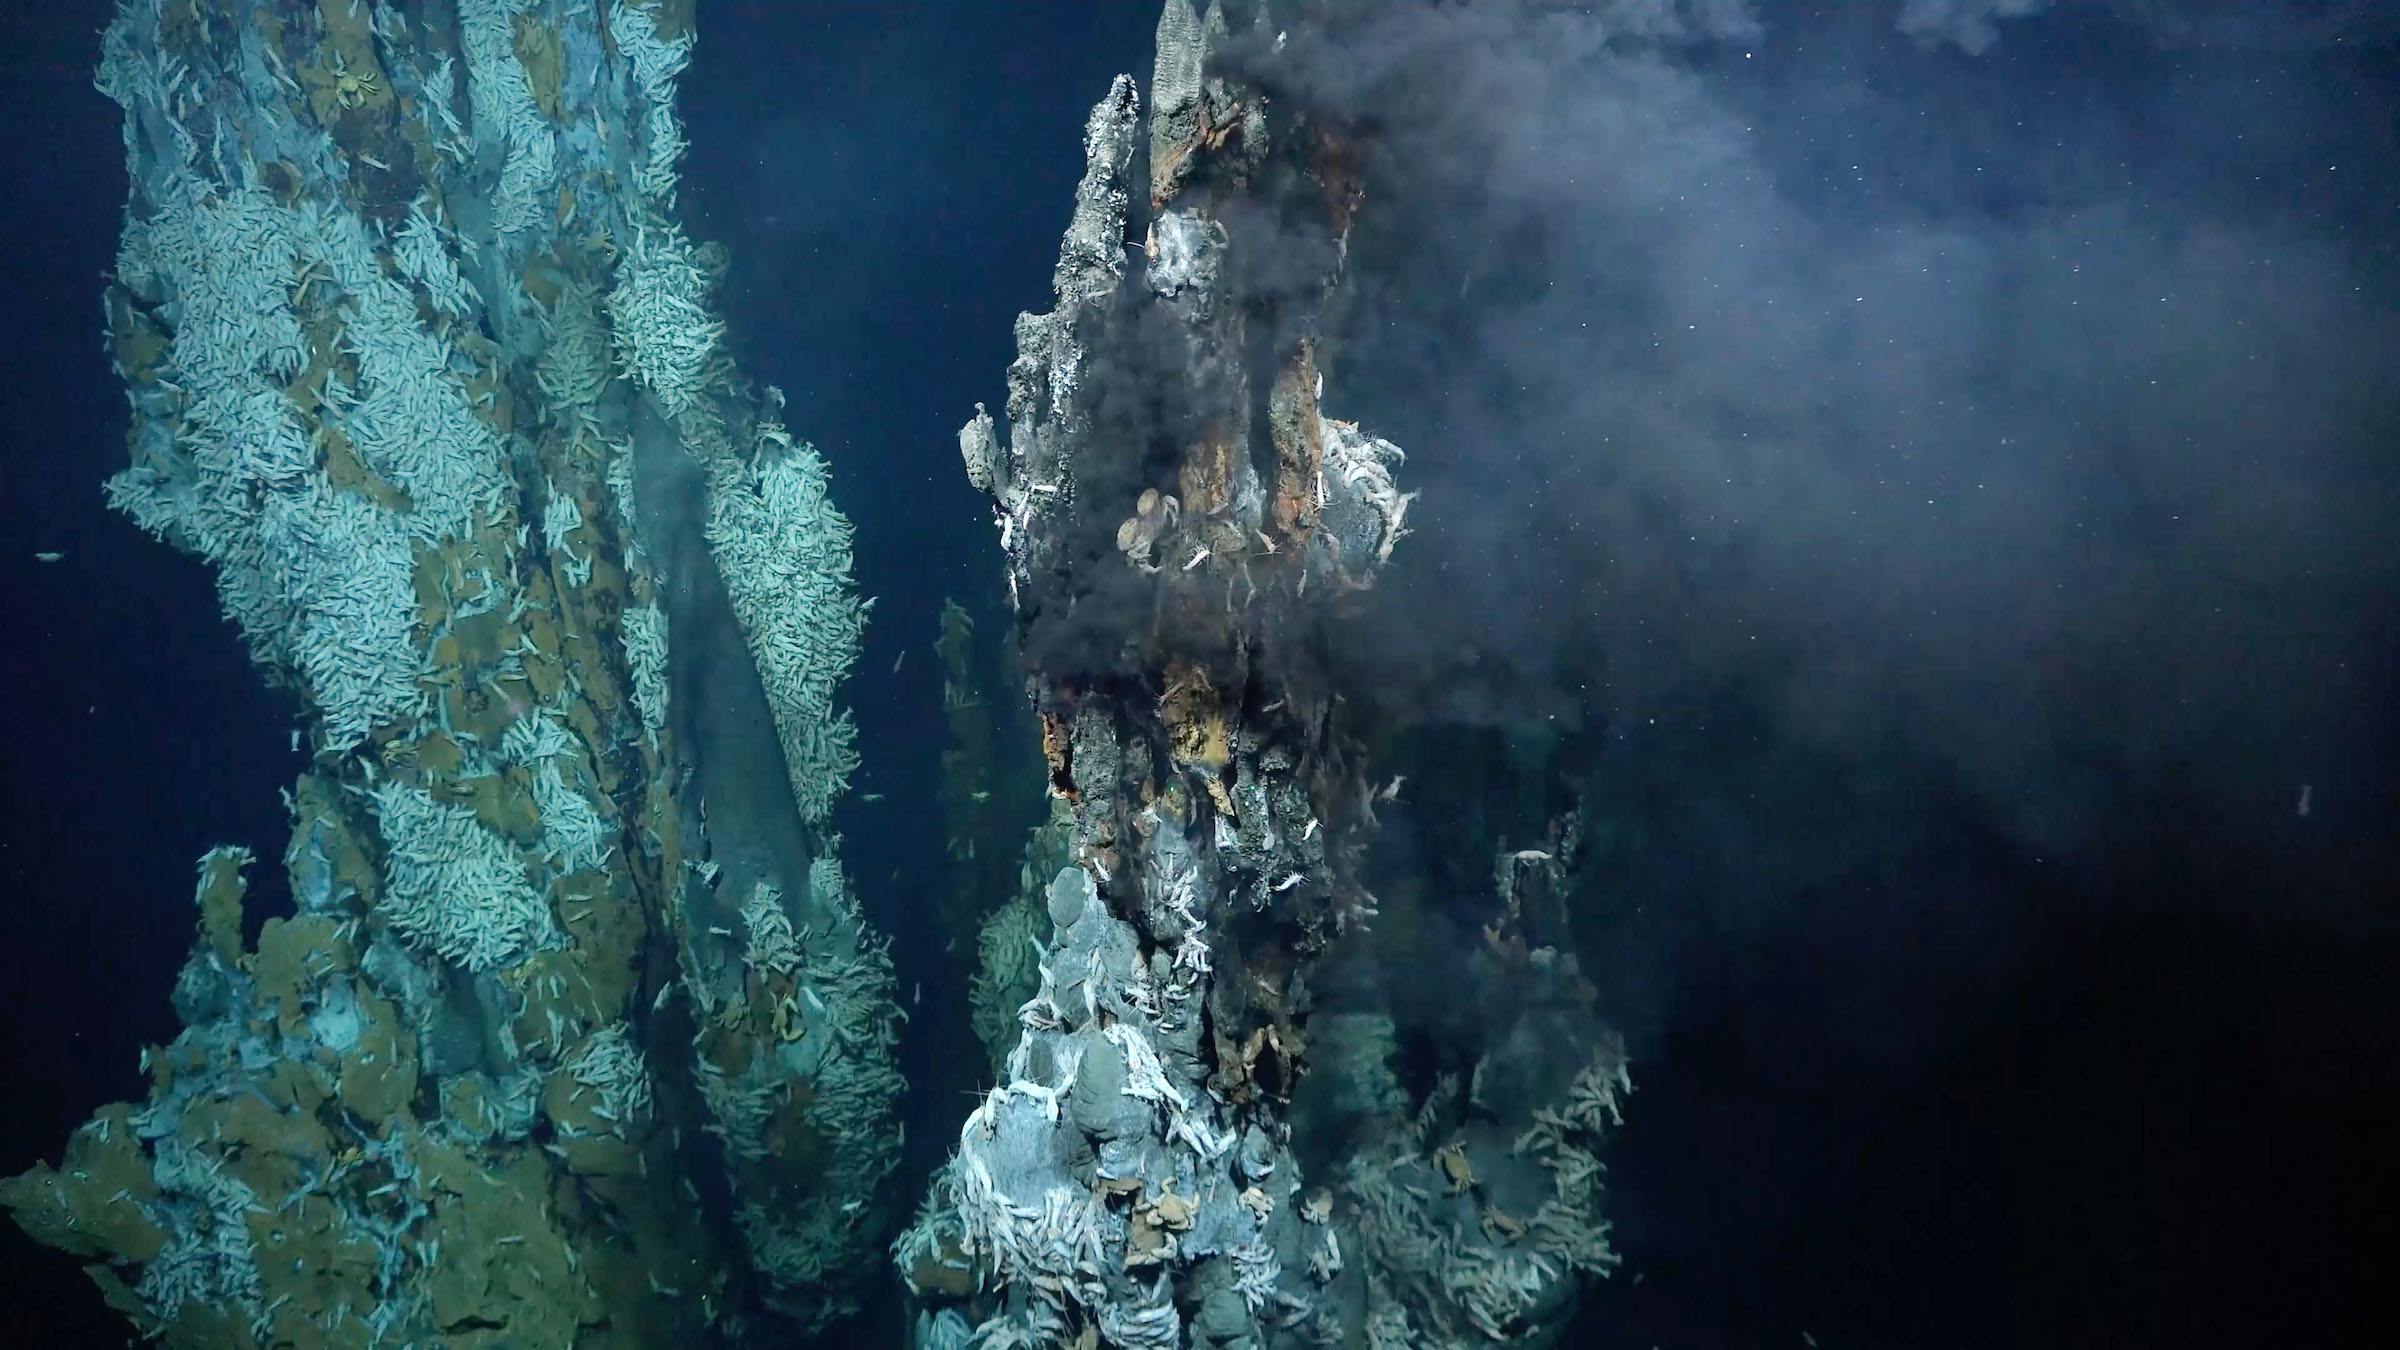 A high-temperature hydrothermal vent field discovered on Puy des Folles Seamount on the Mid-Atlantic Ridge, at approximately 2,000 meters (6,562 feet) in depth, during the In Search of Hydrothermal Lost Cities expedition.